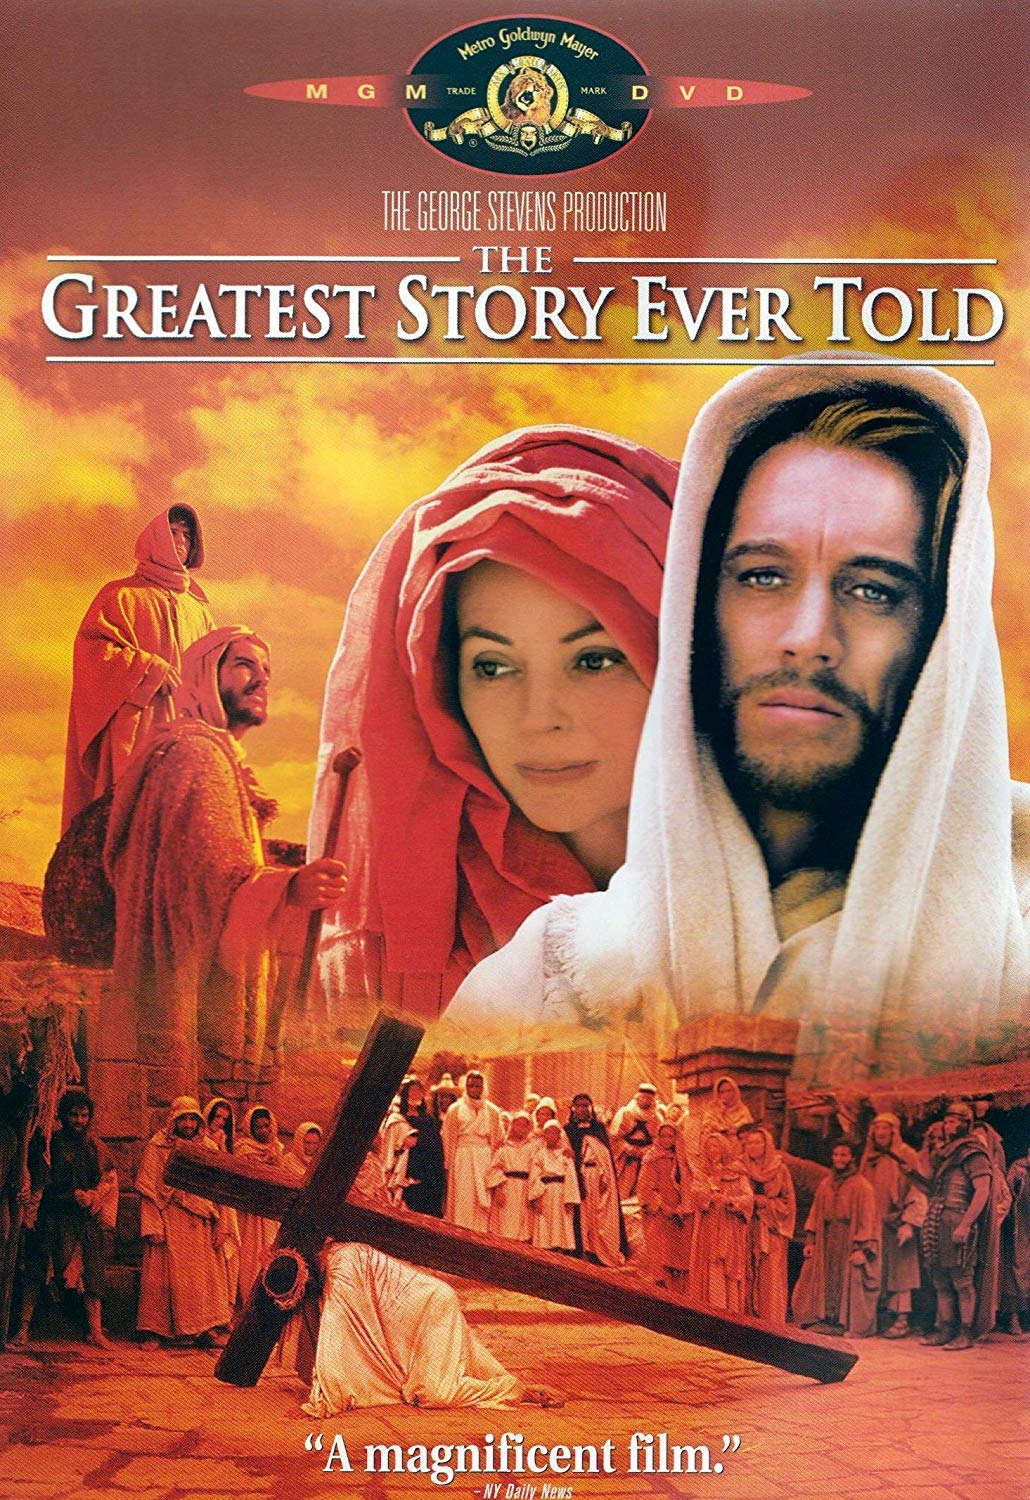 The Greatest Story Ever Told (1965) starring Max von Sydow, Dorothy McGuire, Charlton Heston, Claude Rains, José Ferrer, Telly Savalas